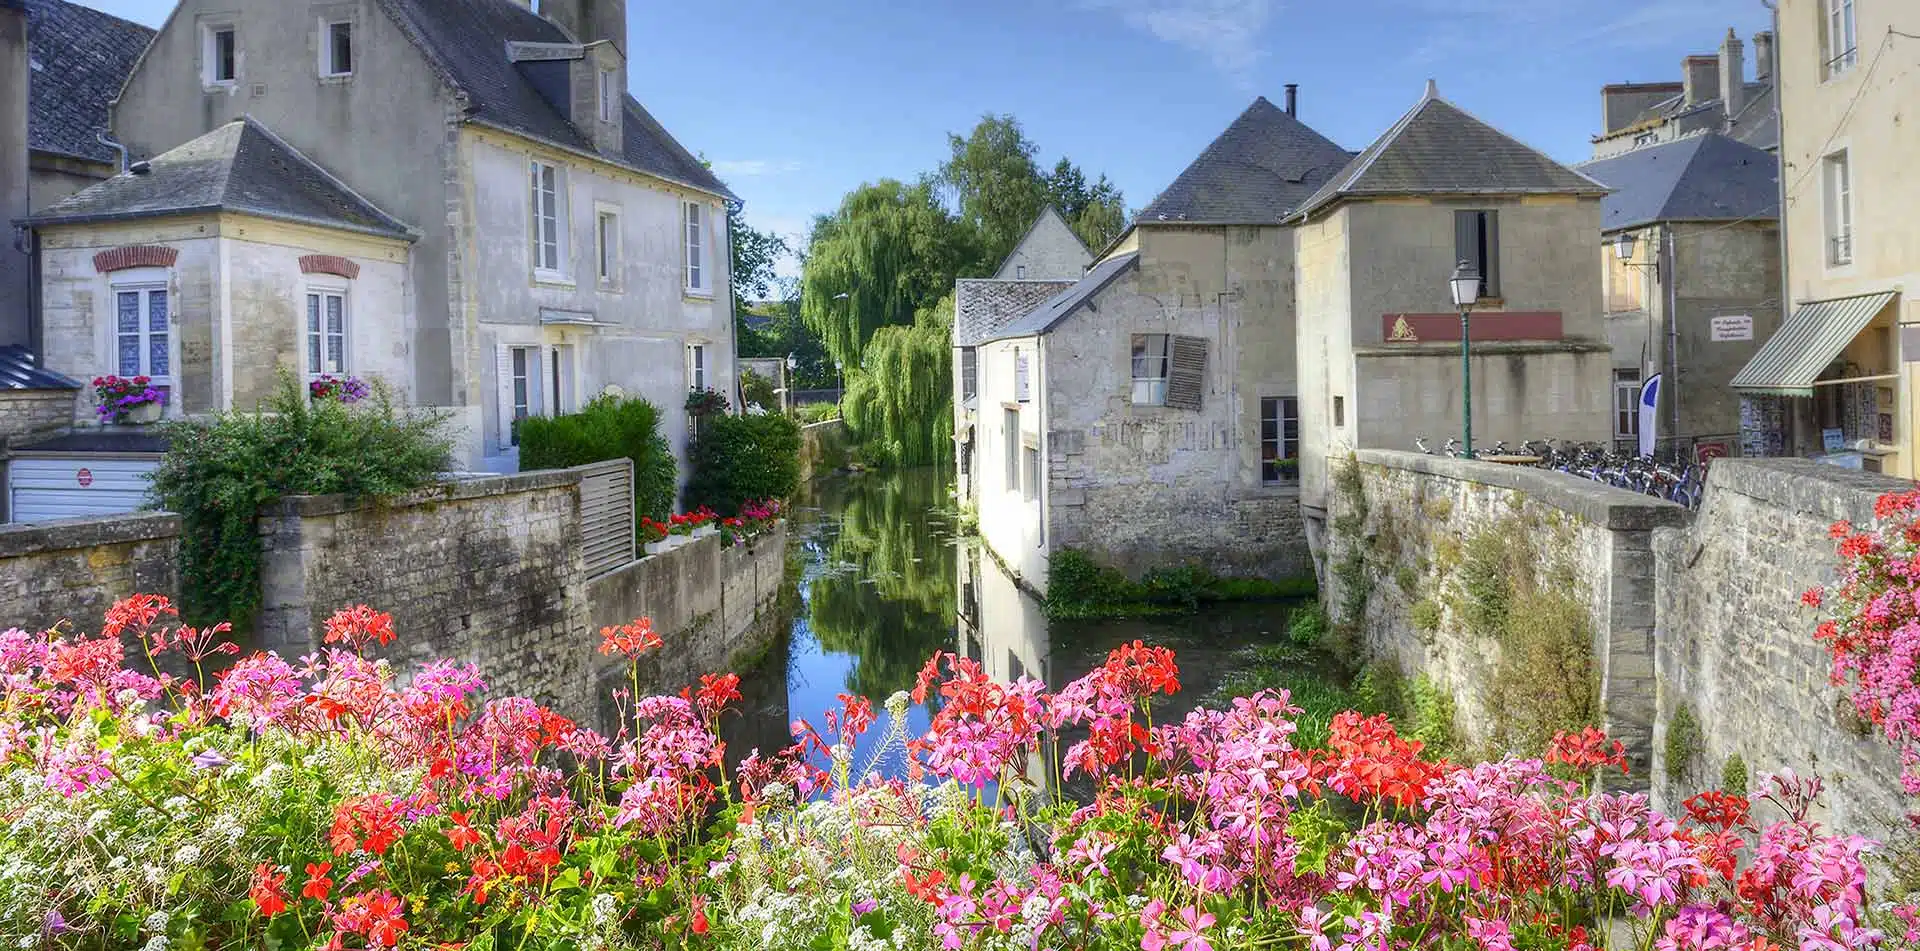 River in a Small Town in France